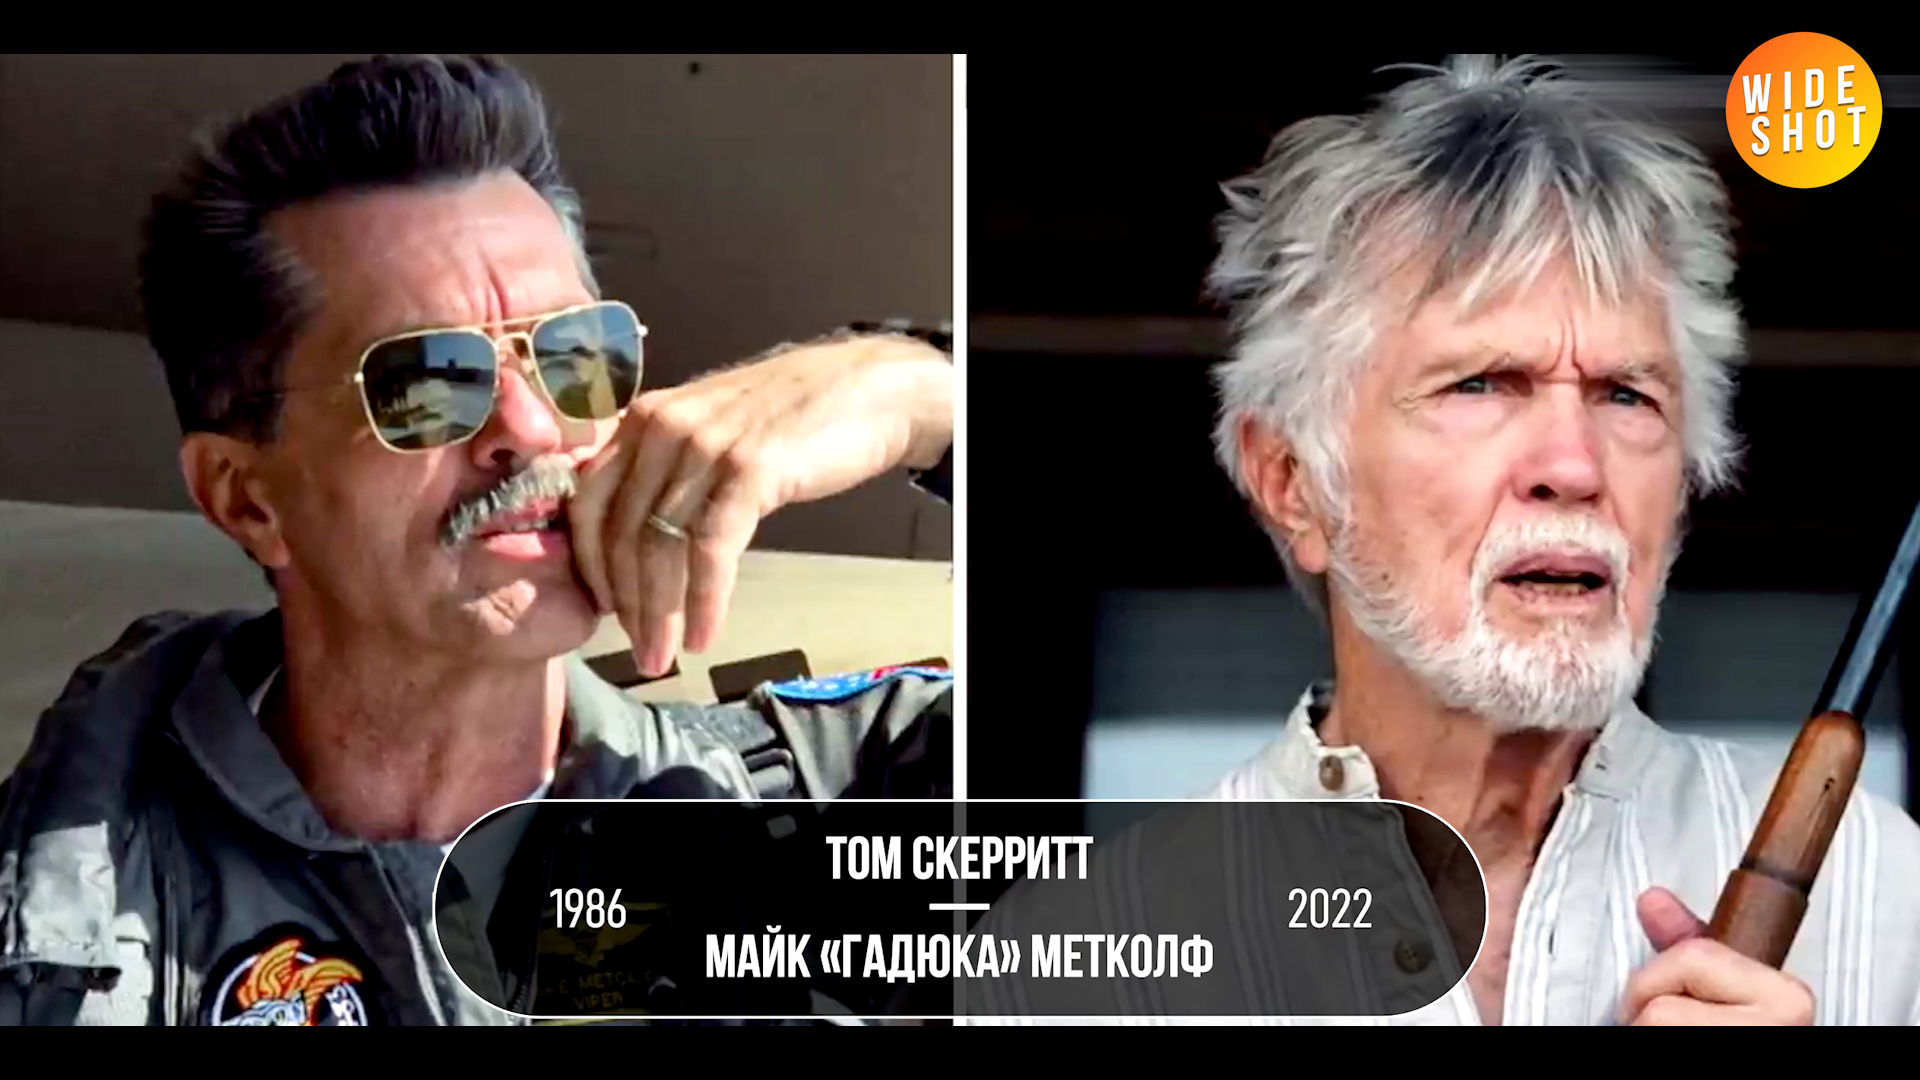 BEST SHOOTER (1986): ACTORS THEN AND NOW (35 YEARS LATER) - Hollywood, Actors and actresses, Celebrities, Video review, Movies, Top Gun, Tom Cruise, Val Kilmer, What to see, It Was-It Was, Movies of the 80s, I advise you to look, Video, Youtube, Longpost